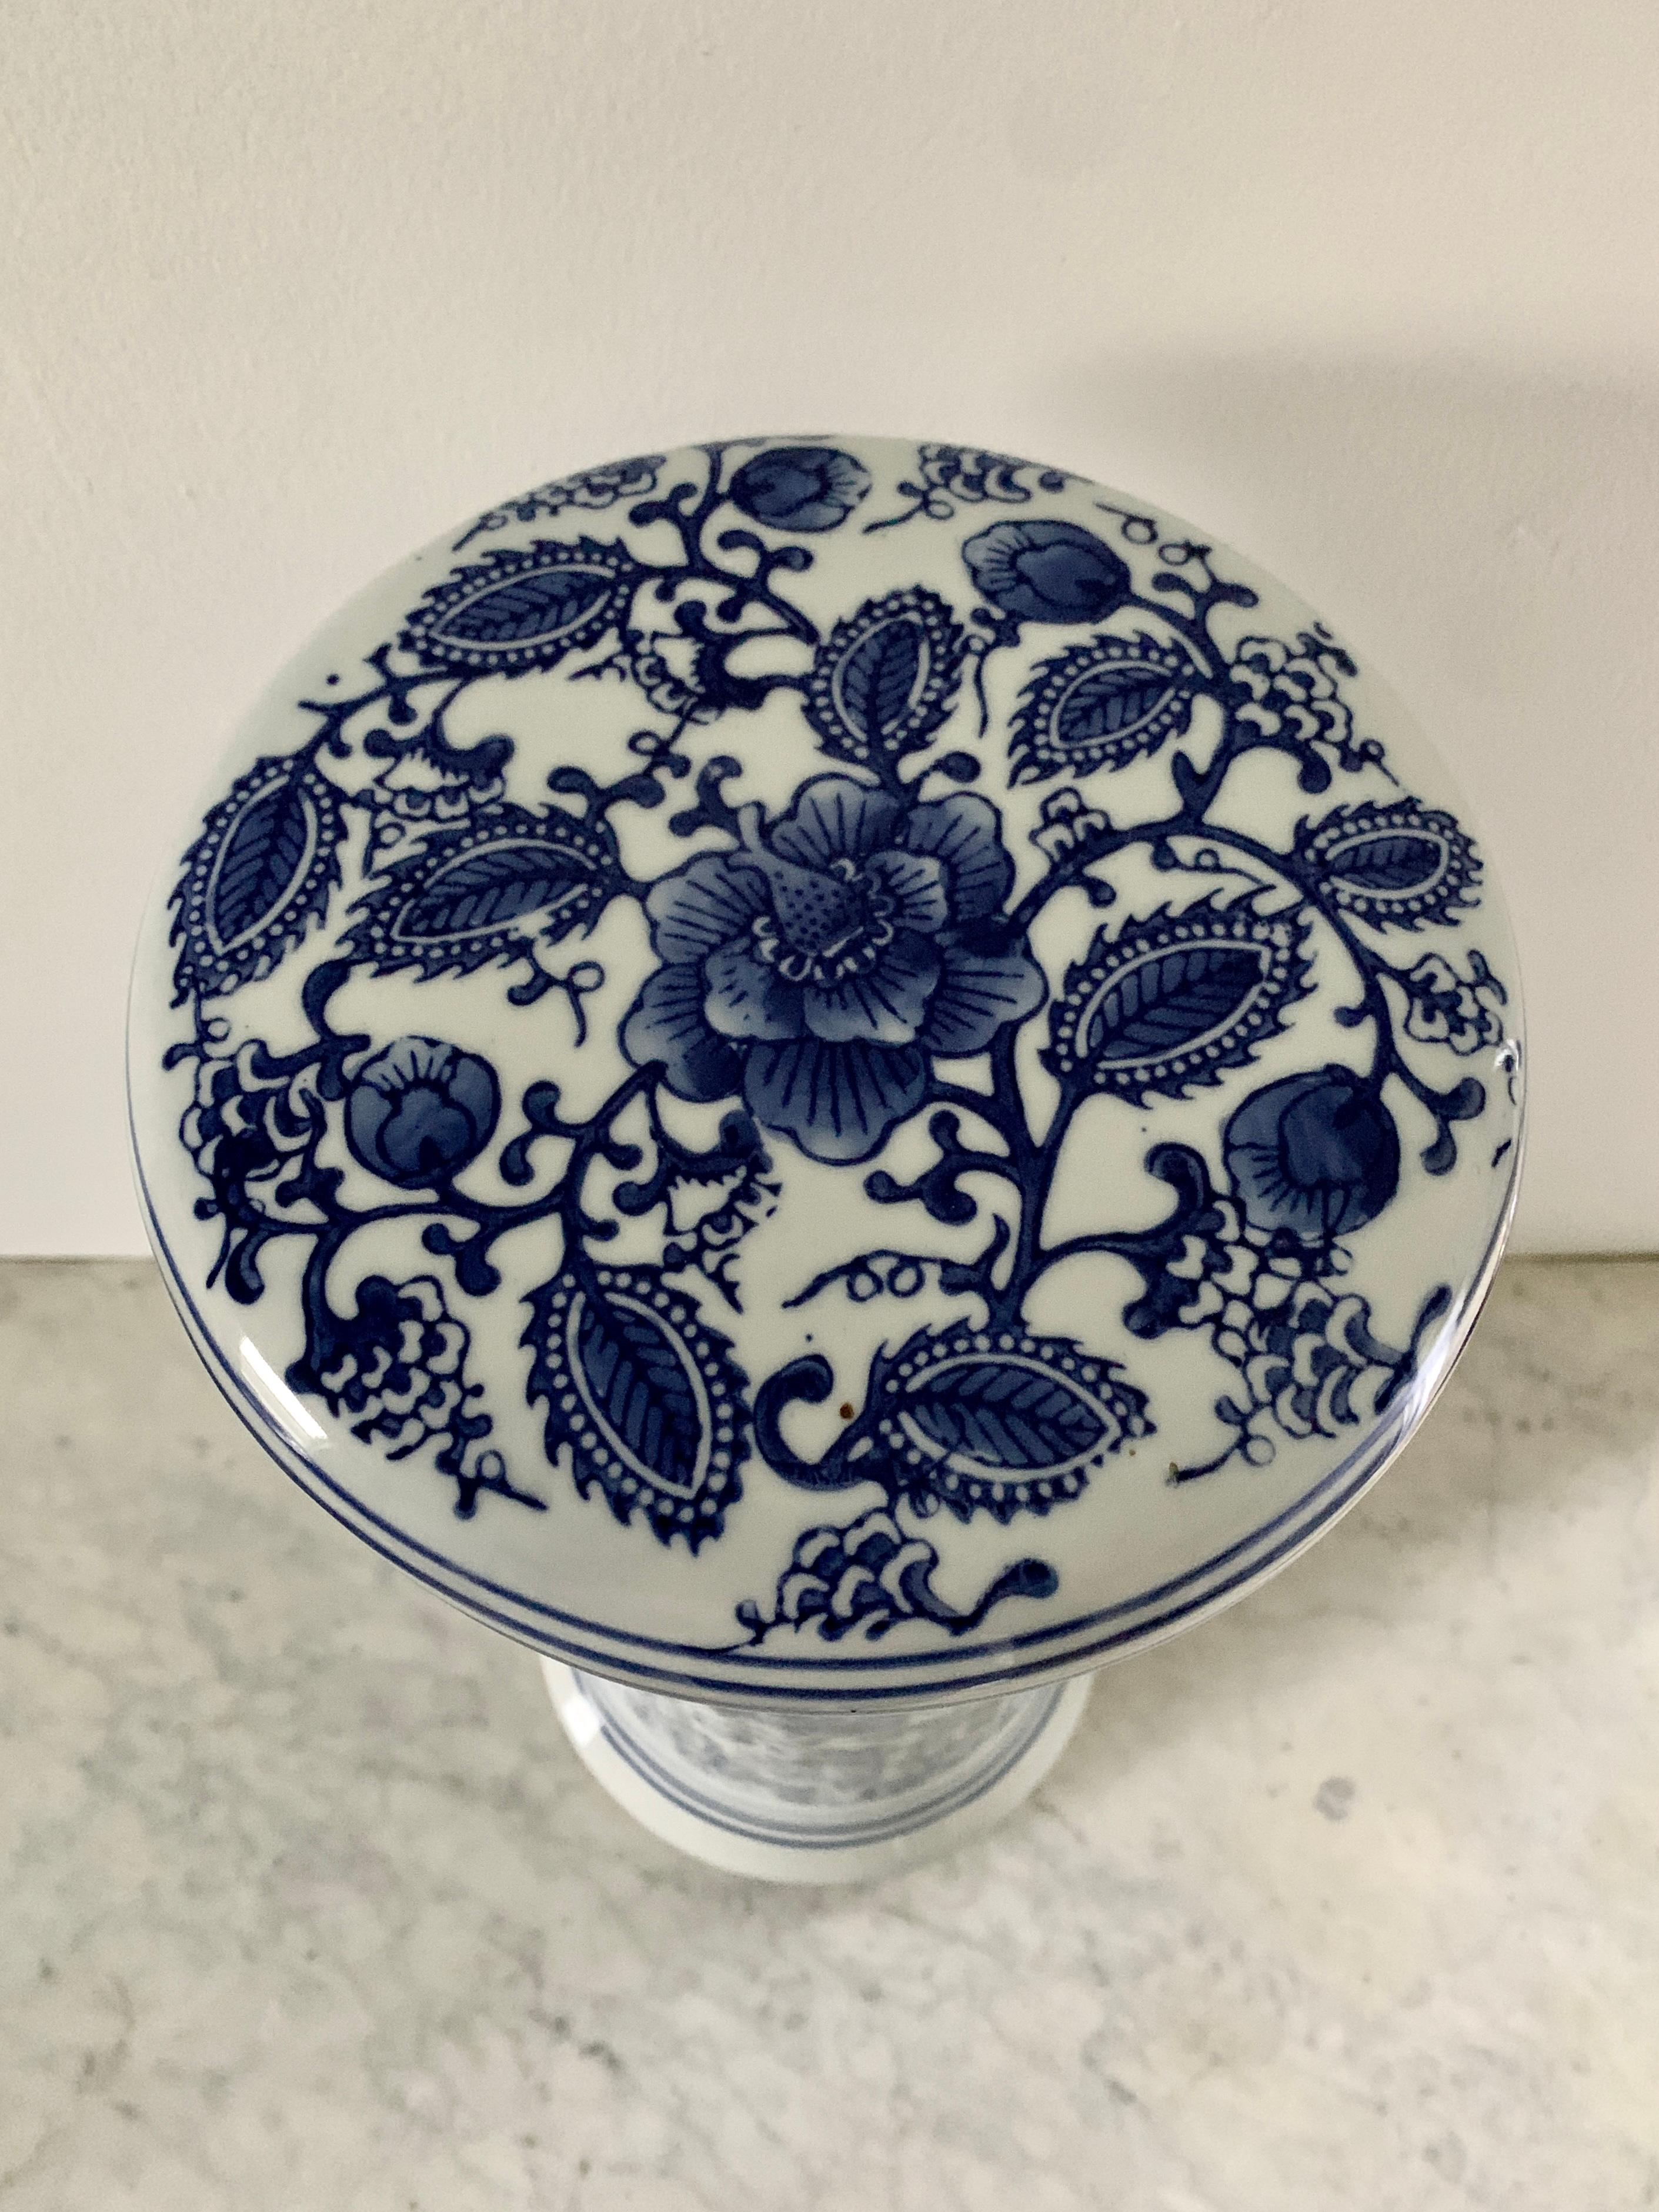 A gorgeous Chinoiserie blue and white porcelain garden stool, plant stand, or small side table

Late 20th Century

Measures: 8.25